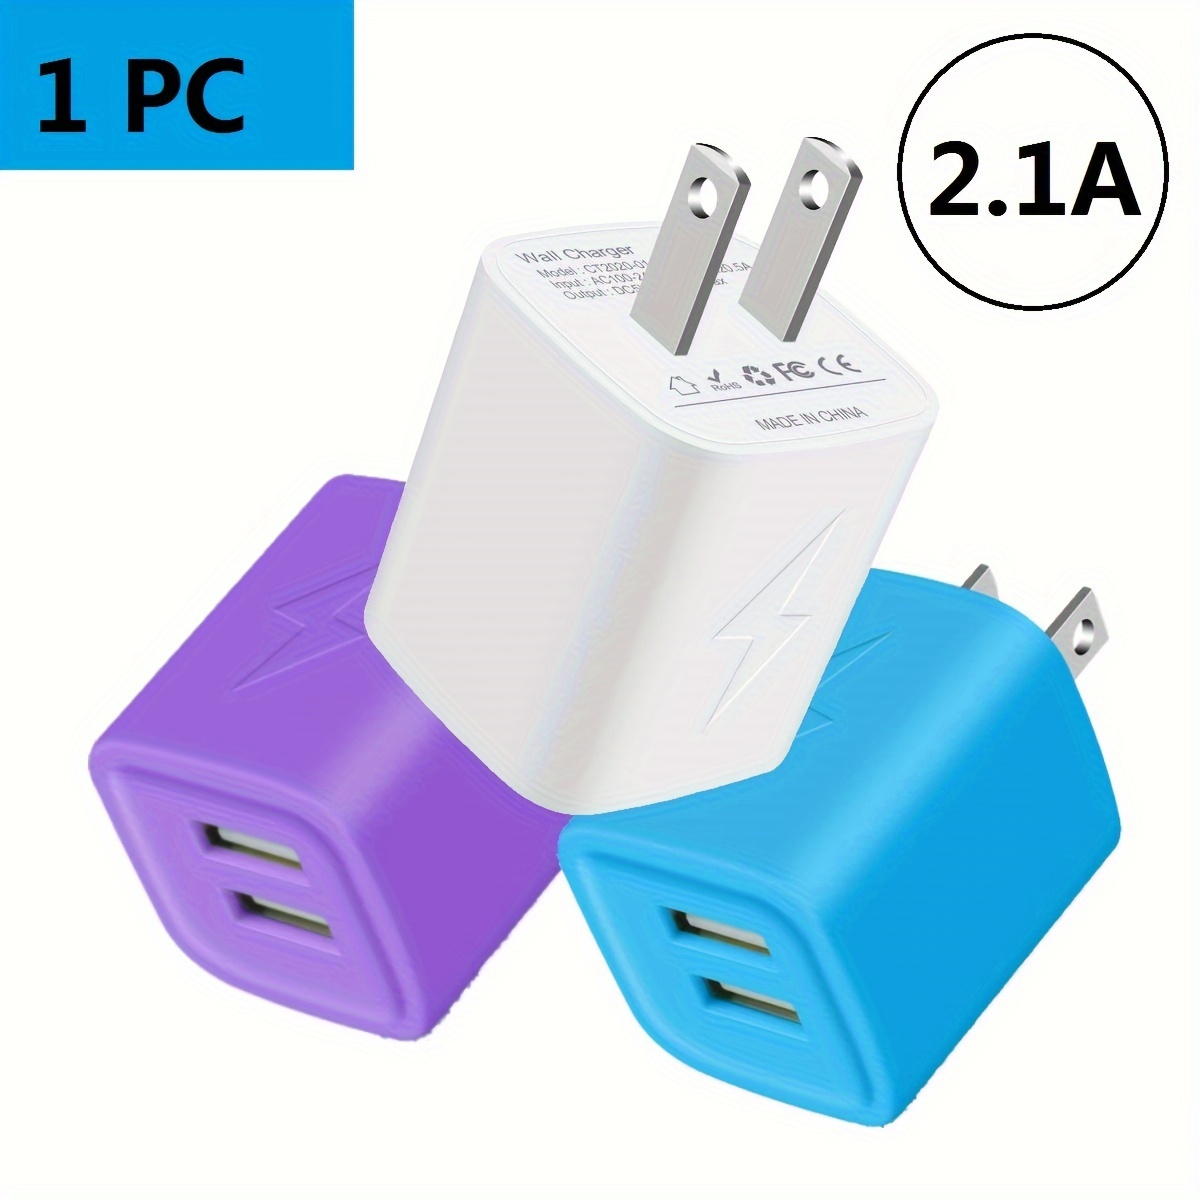 

1pc 2-usb-a Ports Fast Charging Charger Wall Plug Outlet Ac Power Adapter Block Cube White